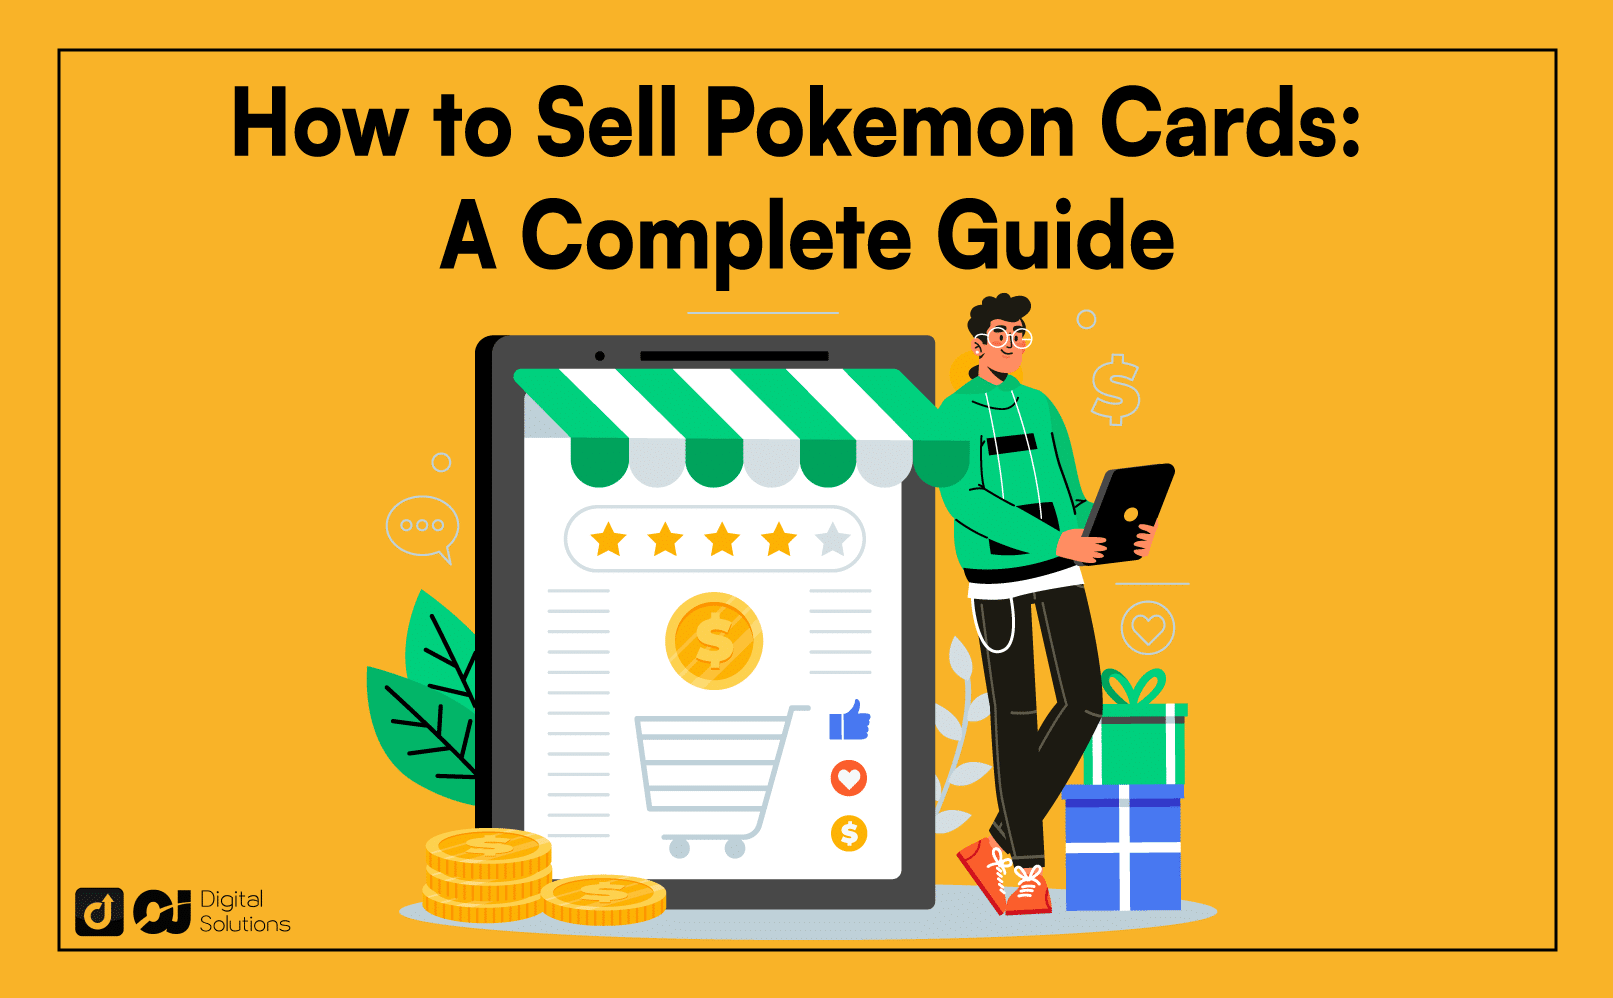 How to Sell Pokemon Cards